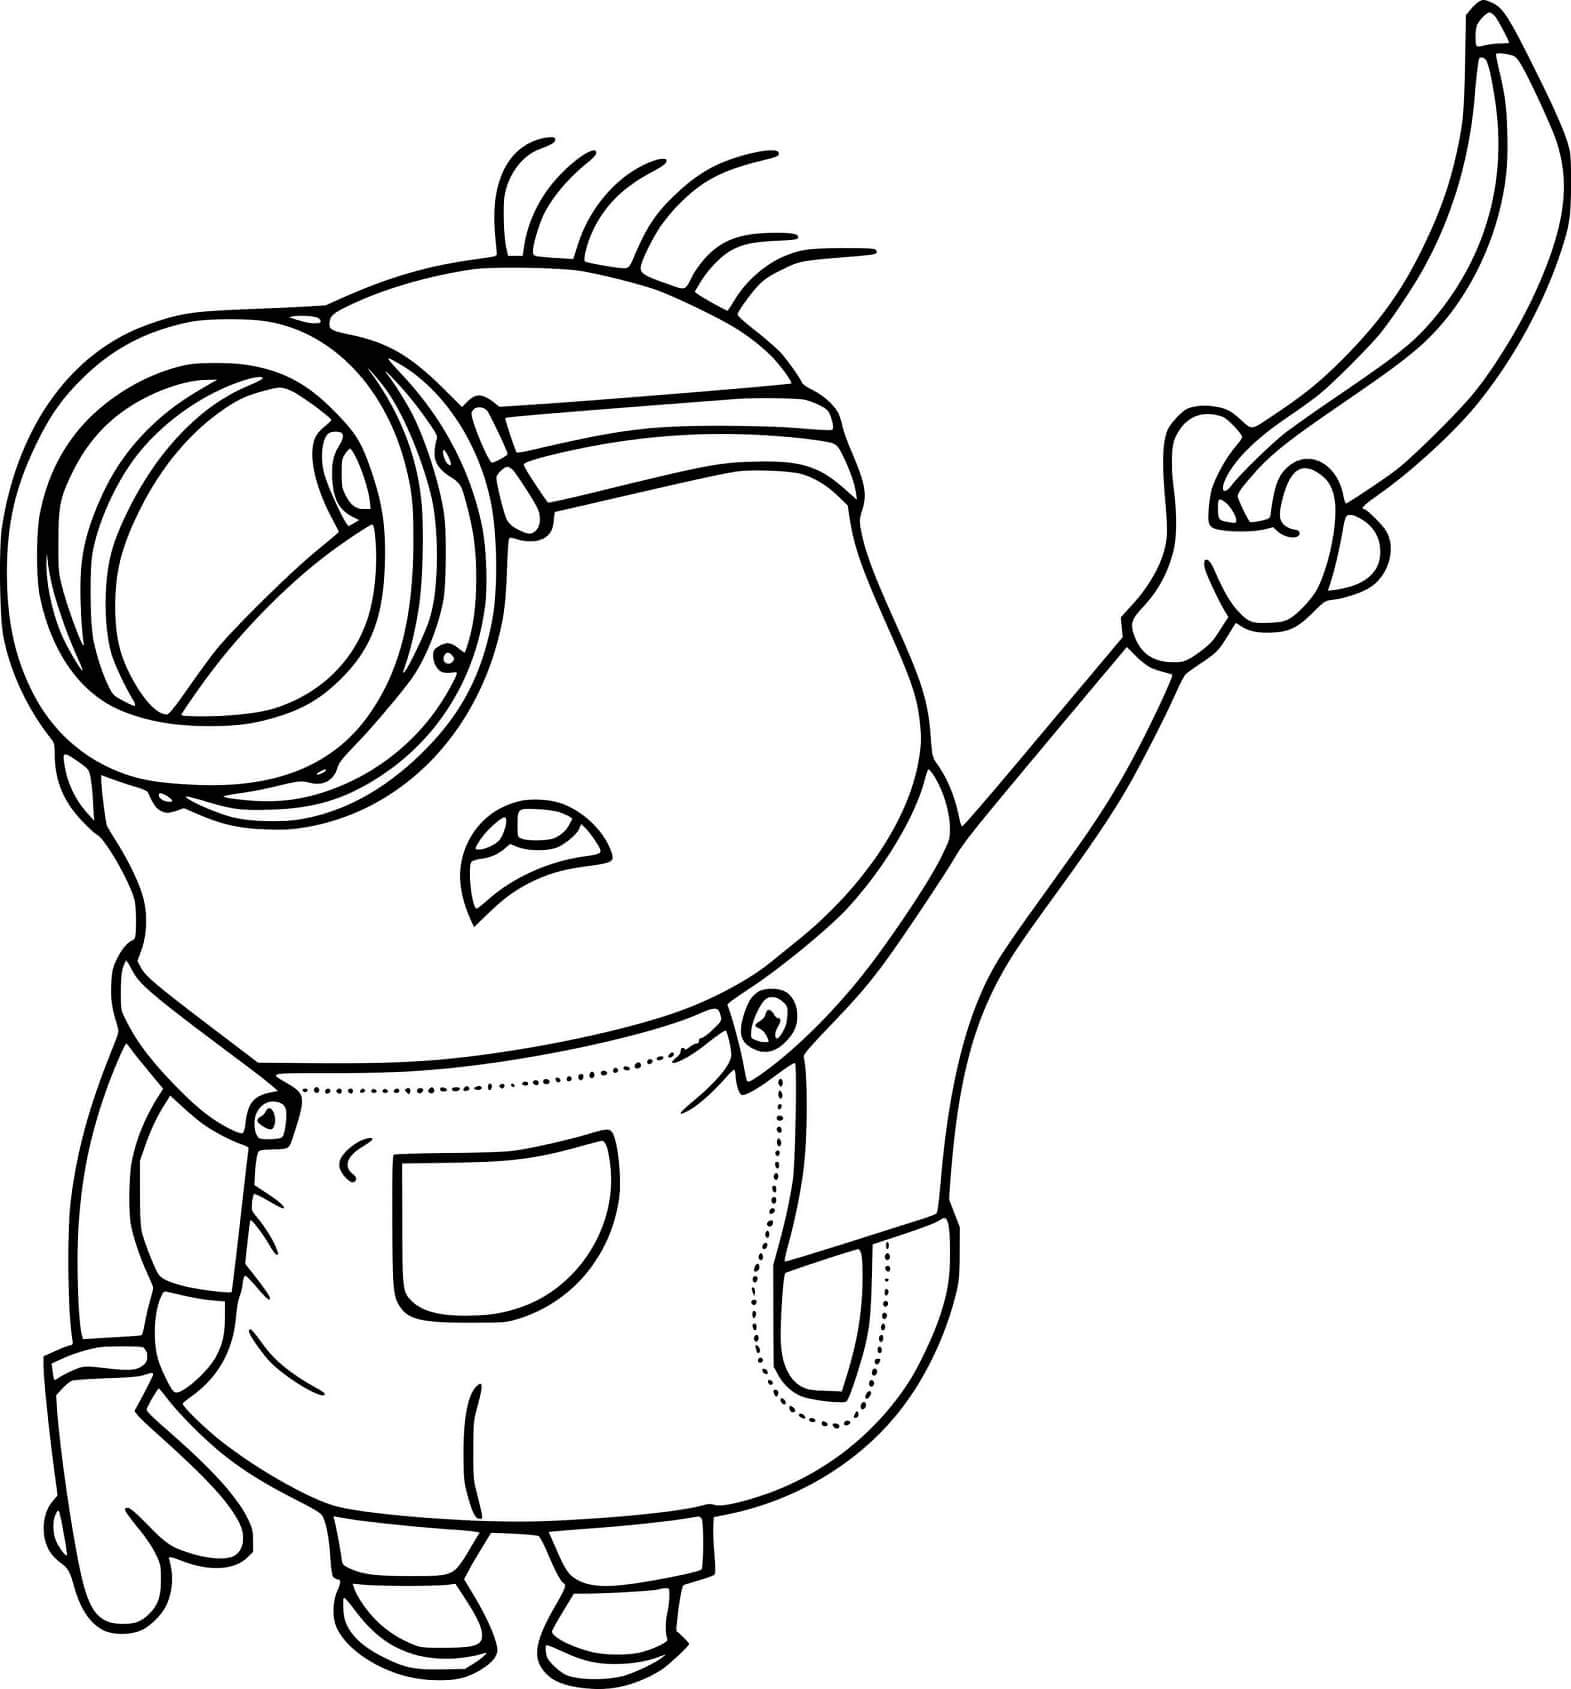 Stuart The Minion Holding Banana coloring page - Download, Print or ...